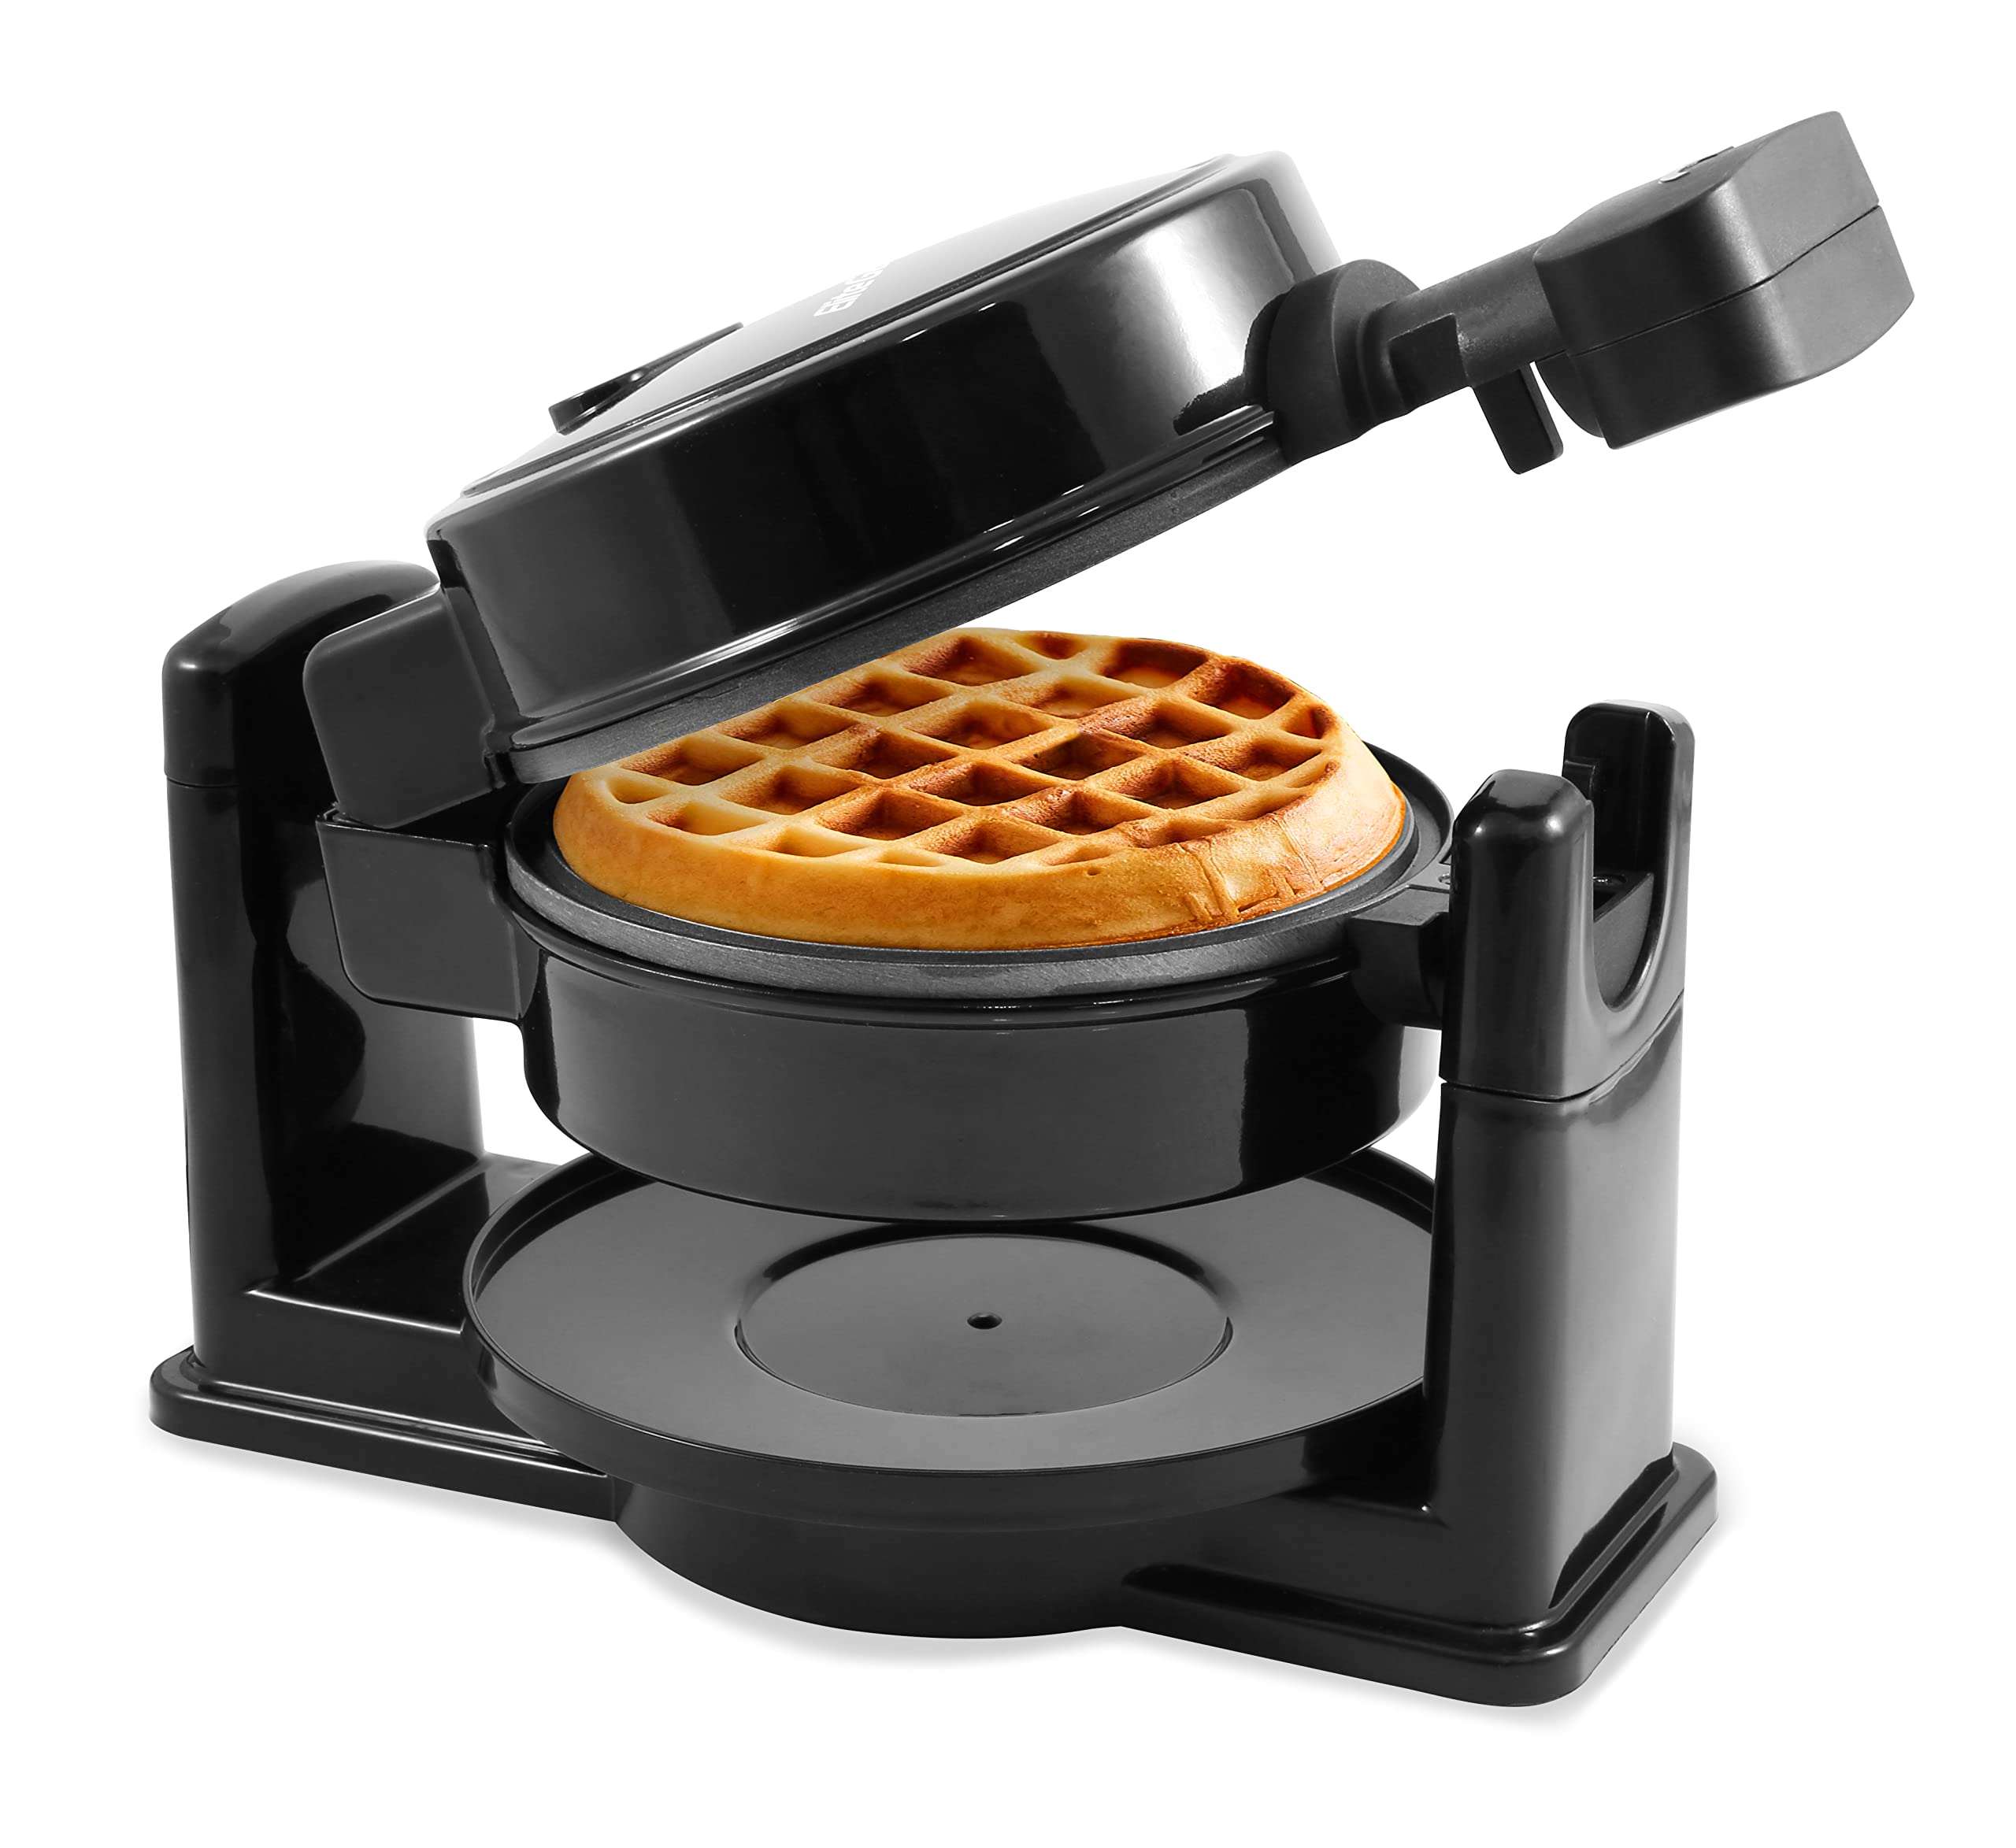 Limited-time deal: Elite Gourmet EWM460 Nonstick Rotating Flip Belgian Waffle Maker, 1.25-Inch Thick Waffles, Hash Browns, Keto, Snacks, Sandwich, Eggs, Easy to Clean, Bl - $17.00